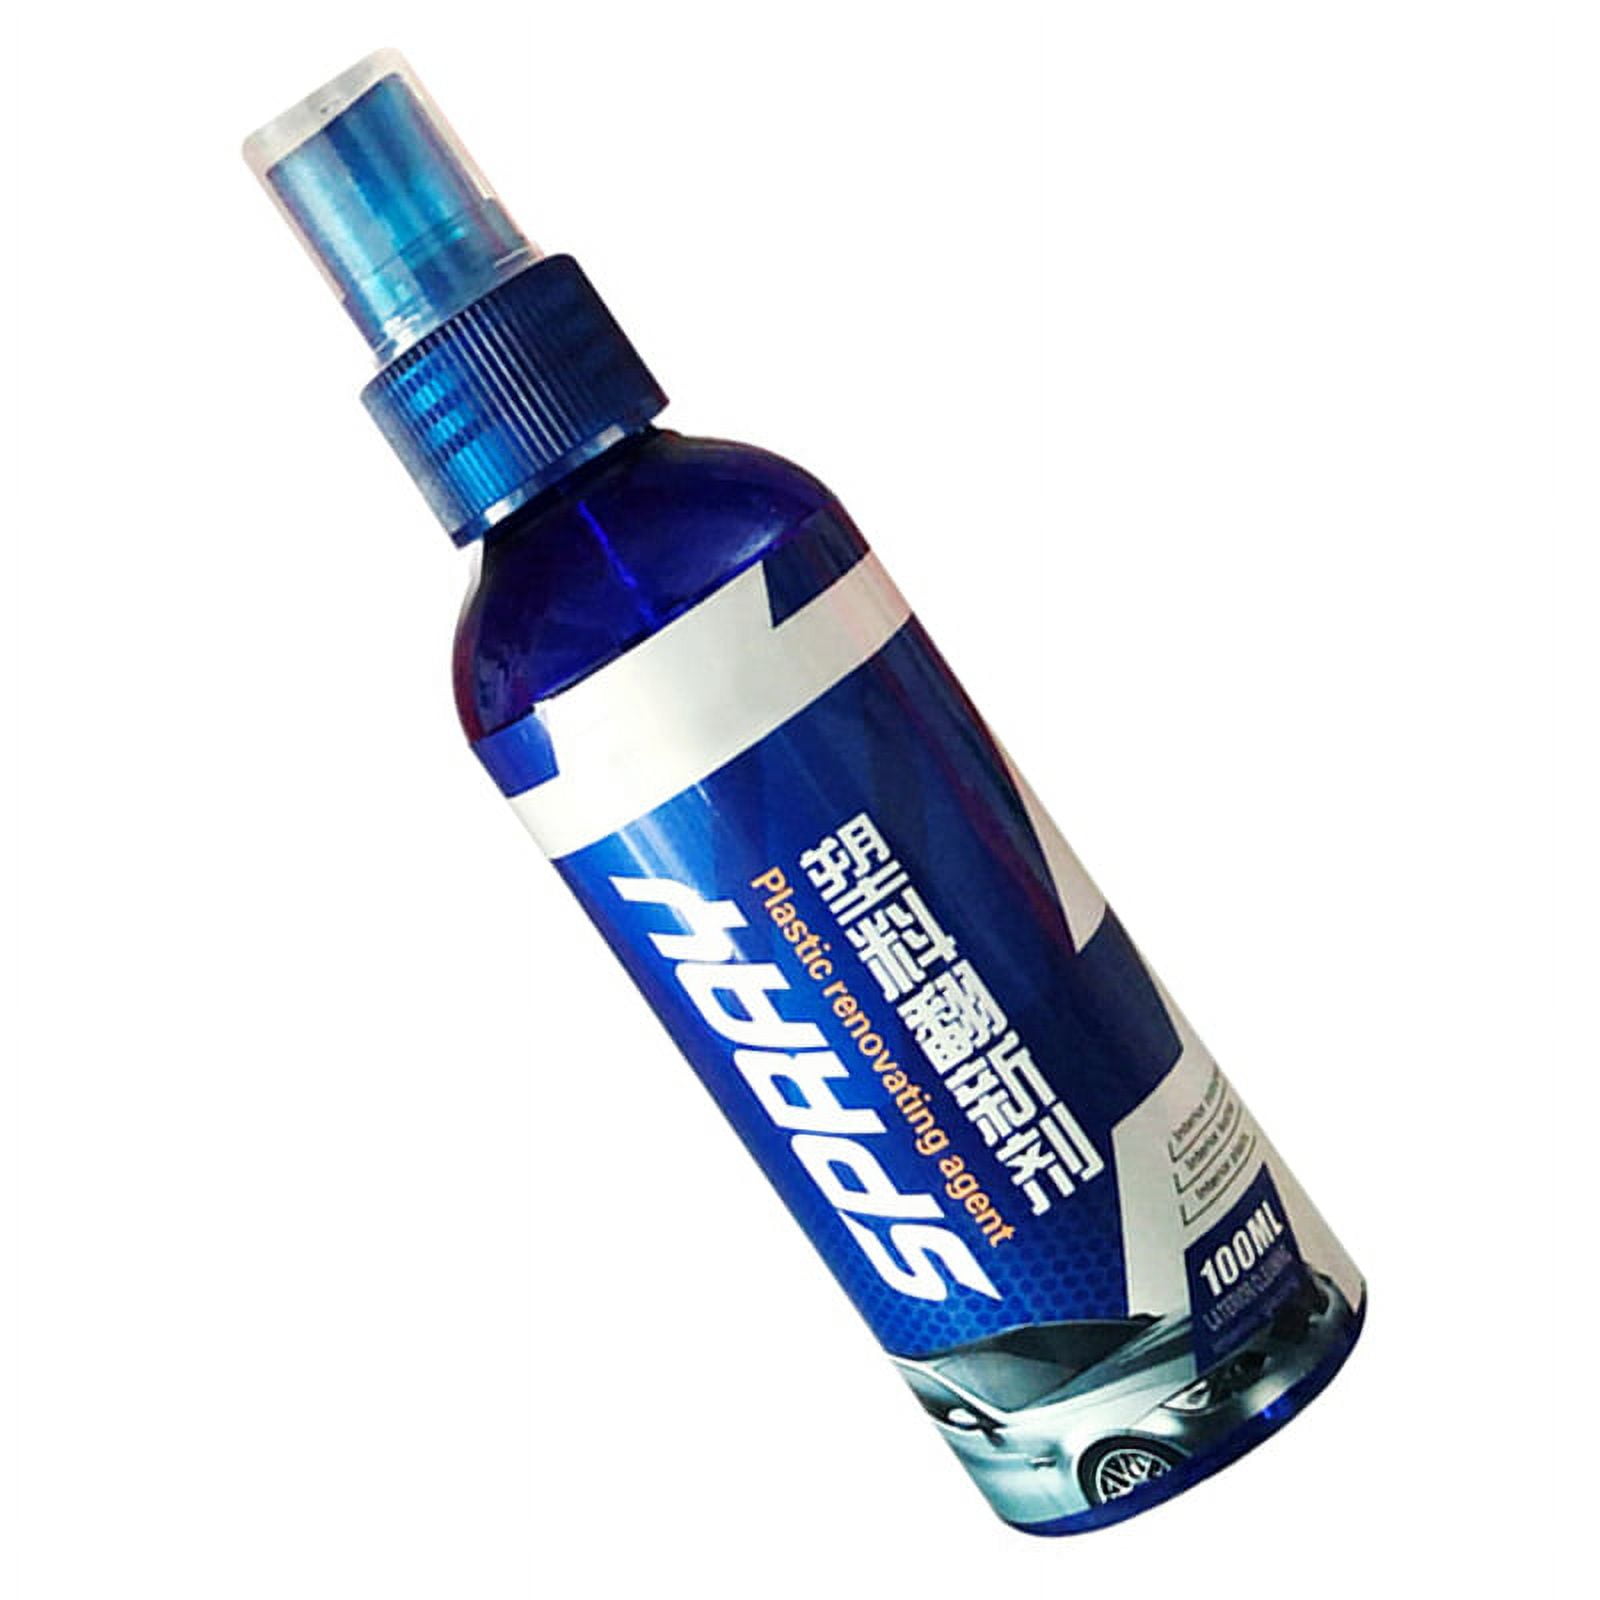 YOUXI - Car Plastic Refreshing Agent Features: 100% brand